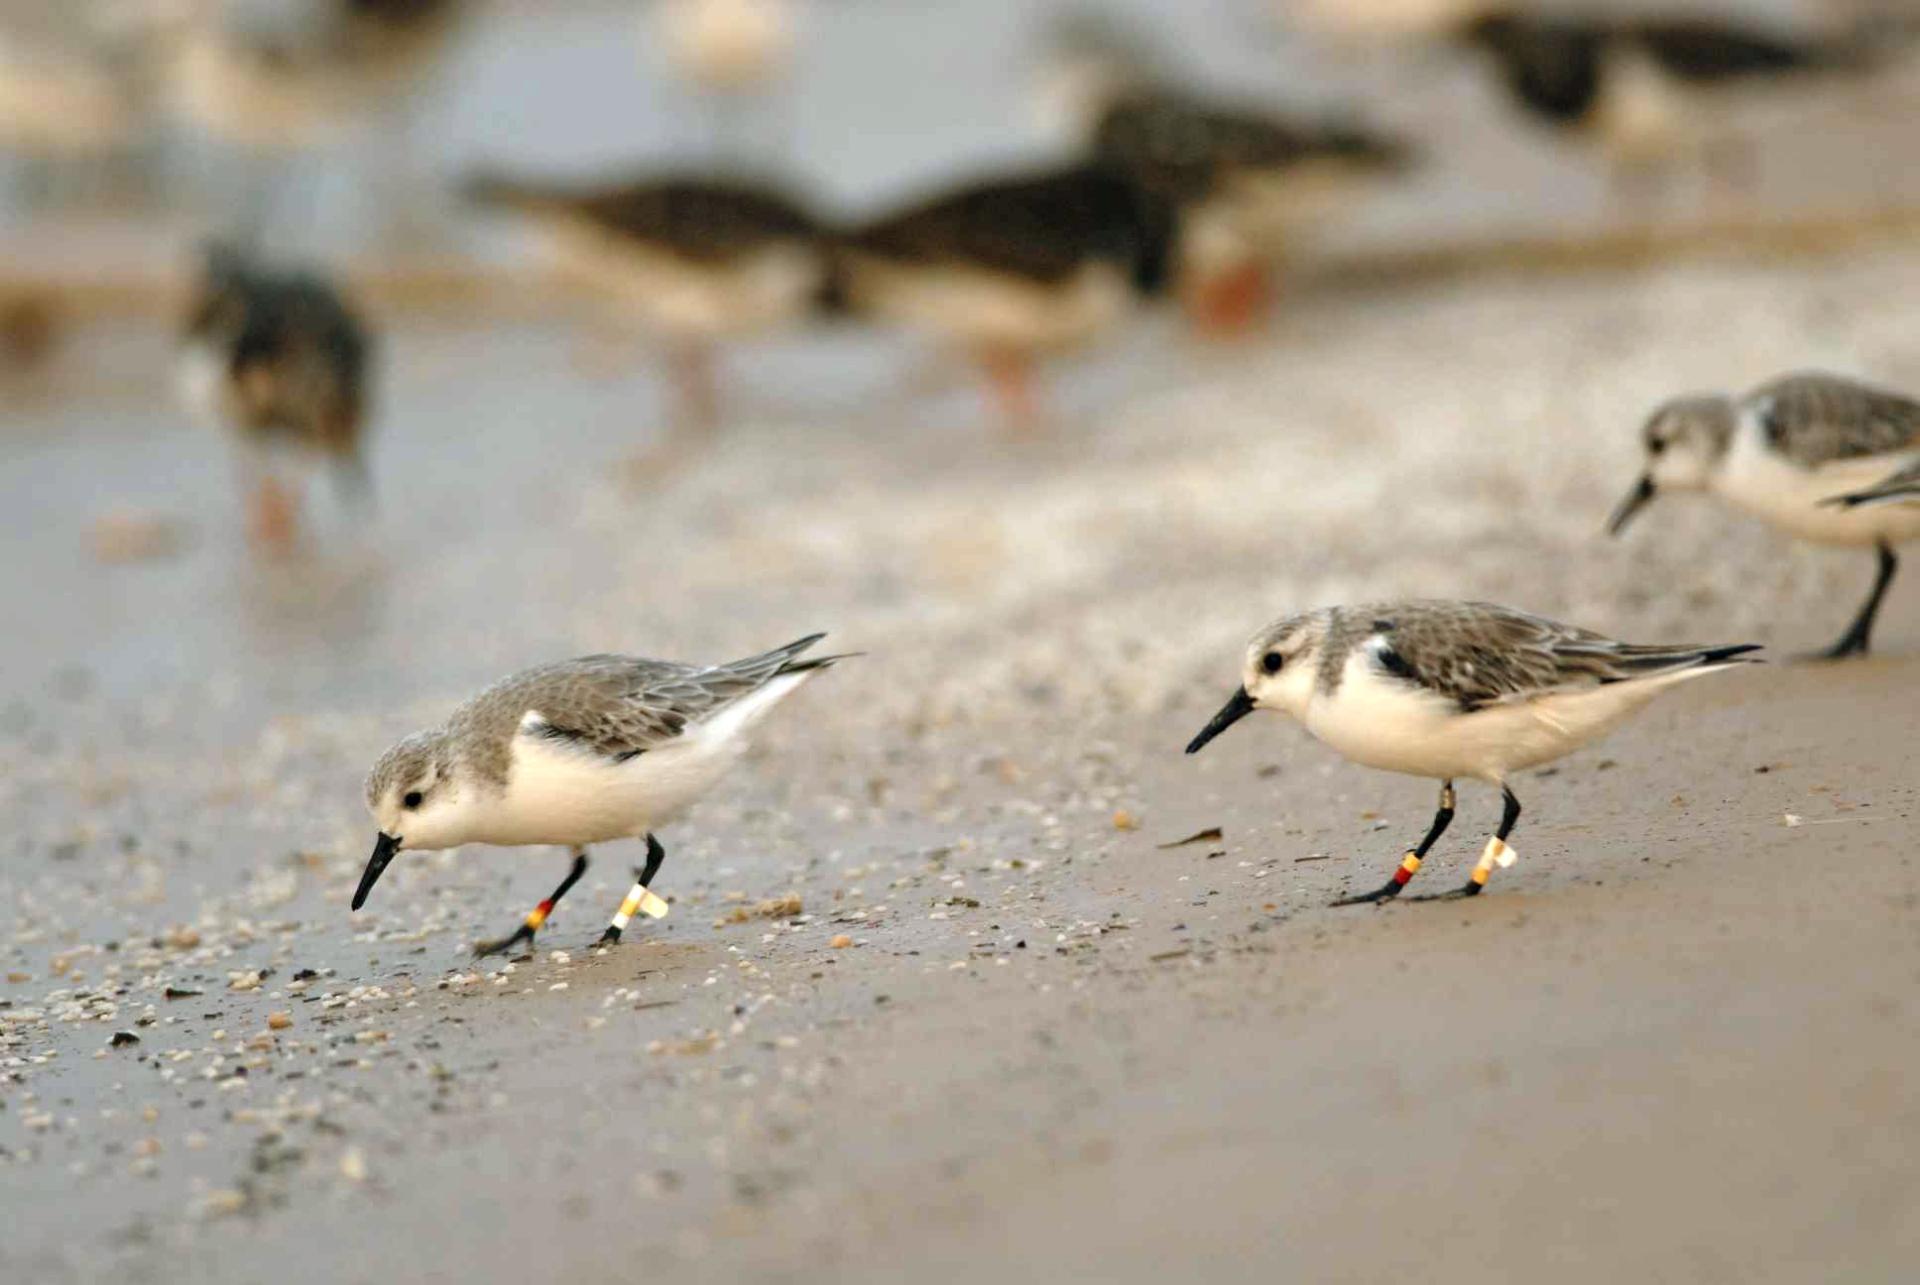 Sanderlings have been tagged with colour-rings to make them individually identifiable. The study is based on tens of thousands of observations of such tagged birds. Photo by Jeroen Reneerkens